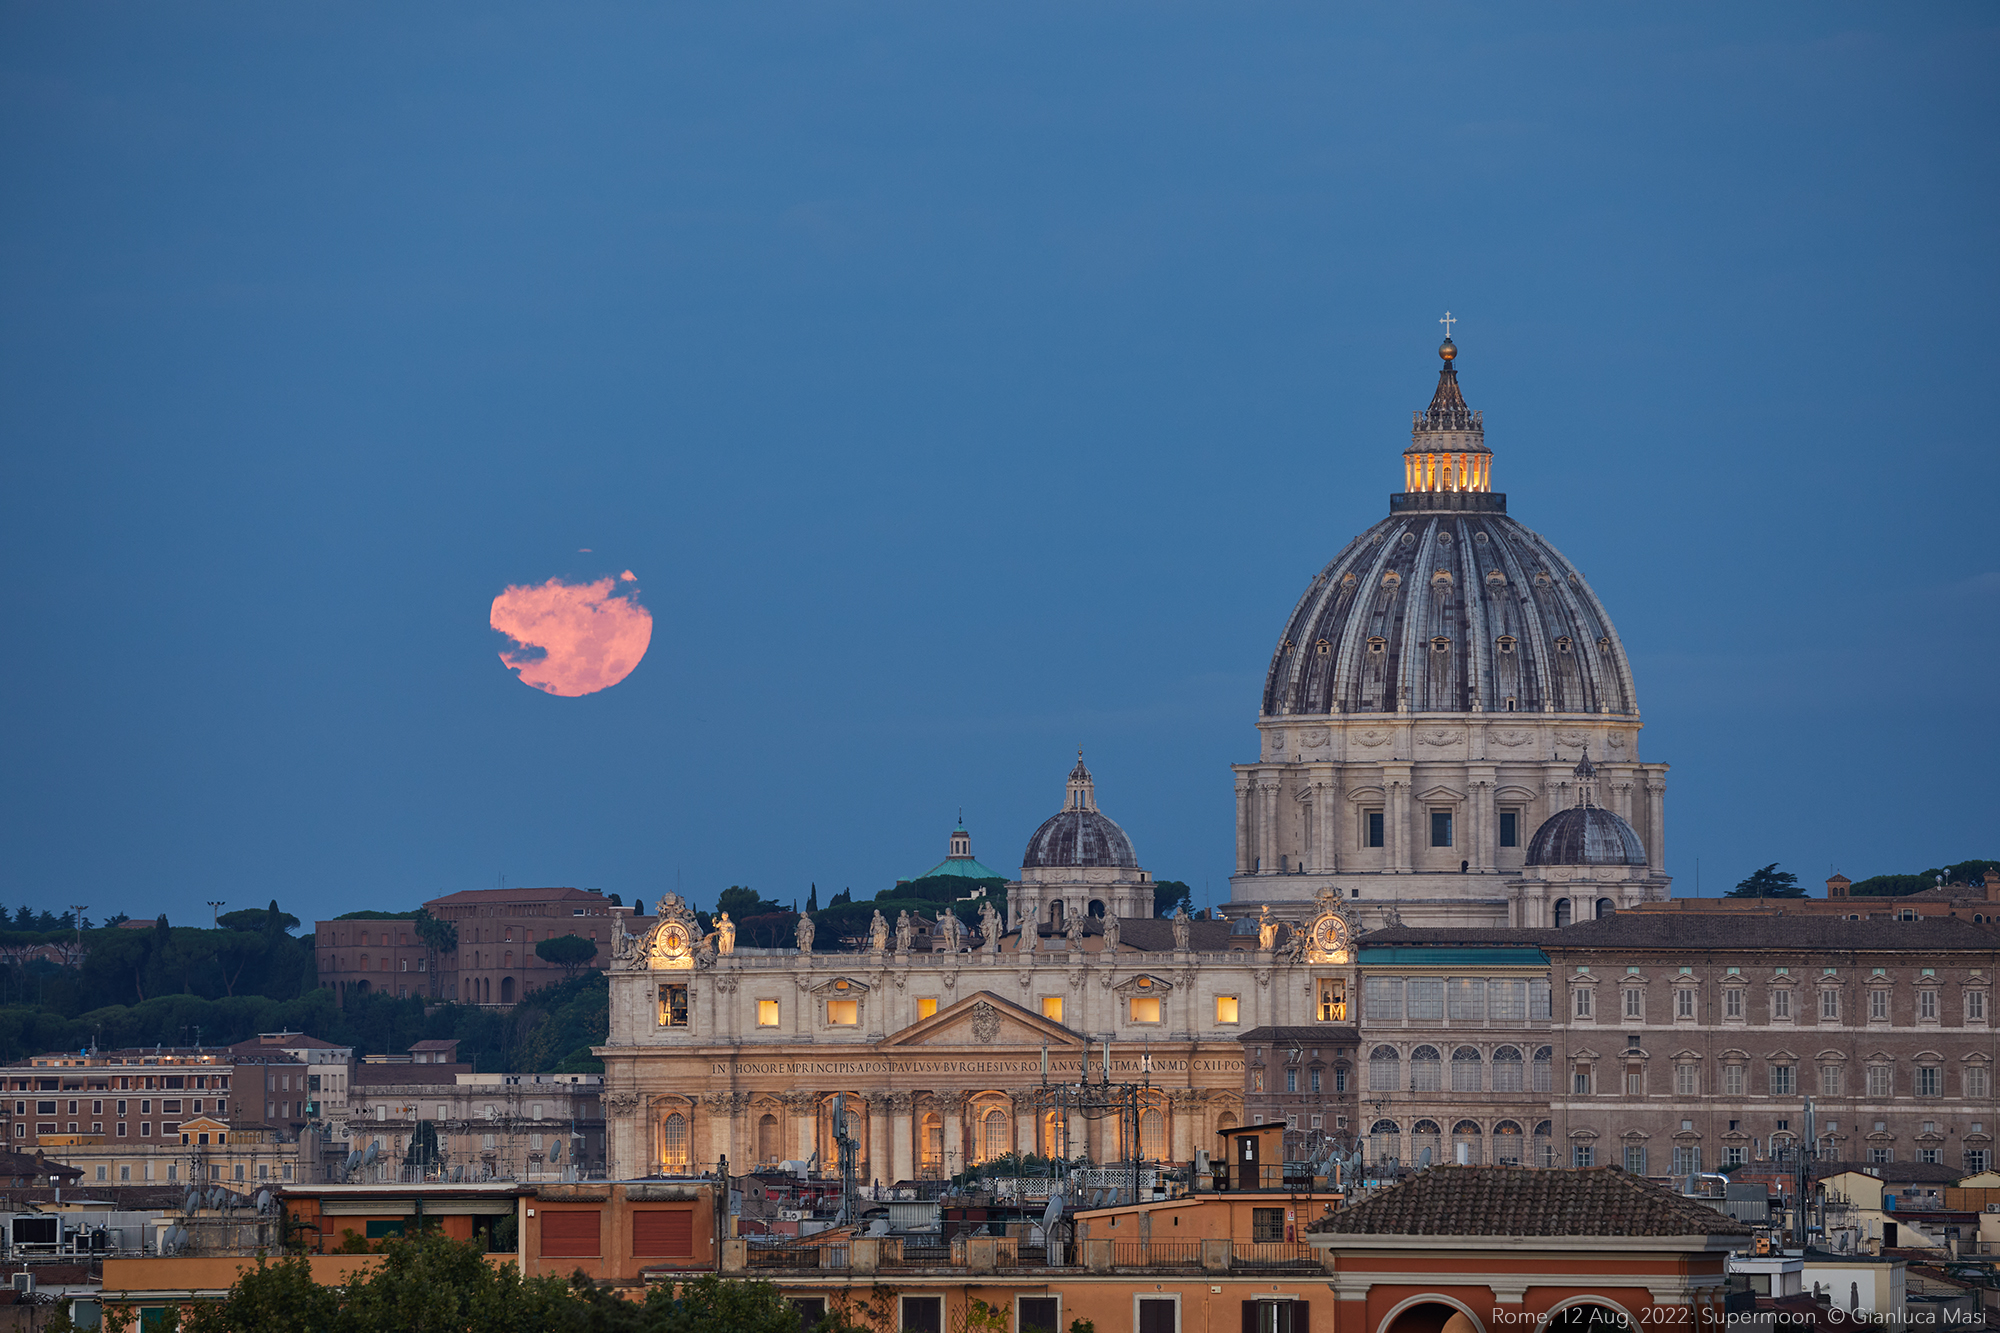 The "Sturgeon" Supermoon 2022 sets hangs above the St. Peter's Basilica - 12 Aug. 2022.